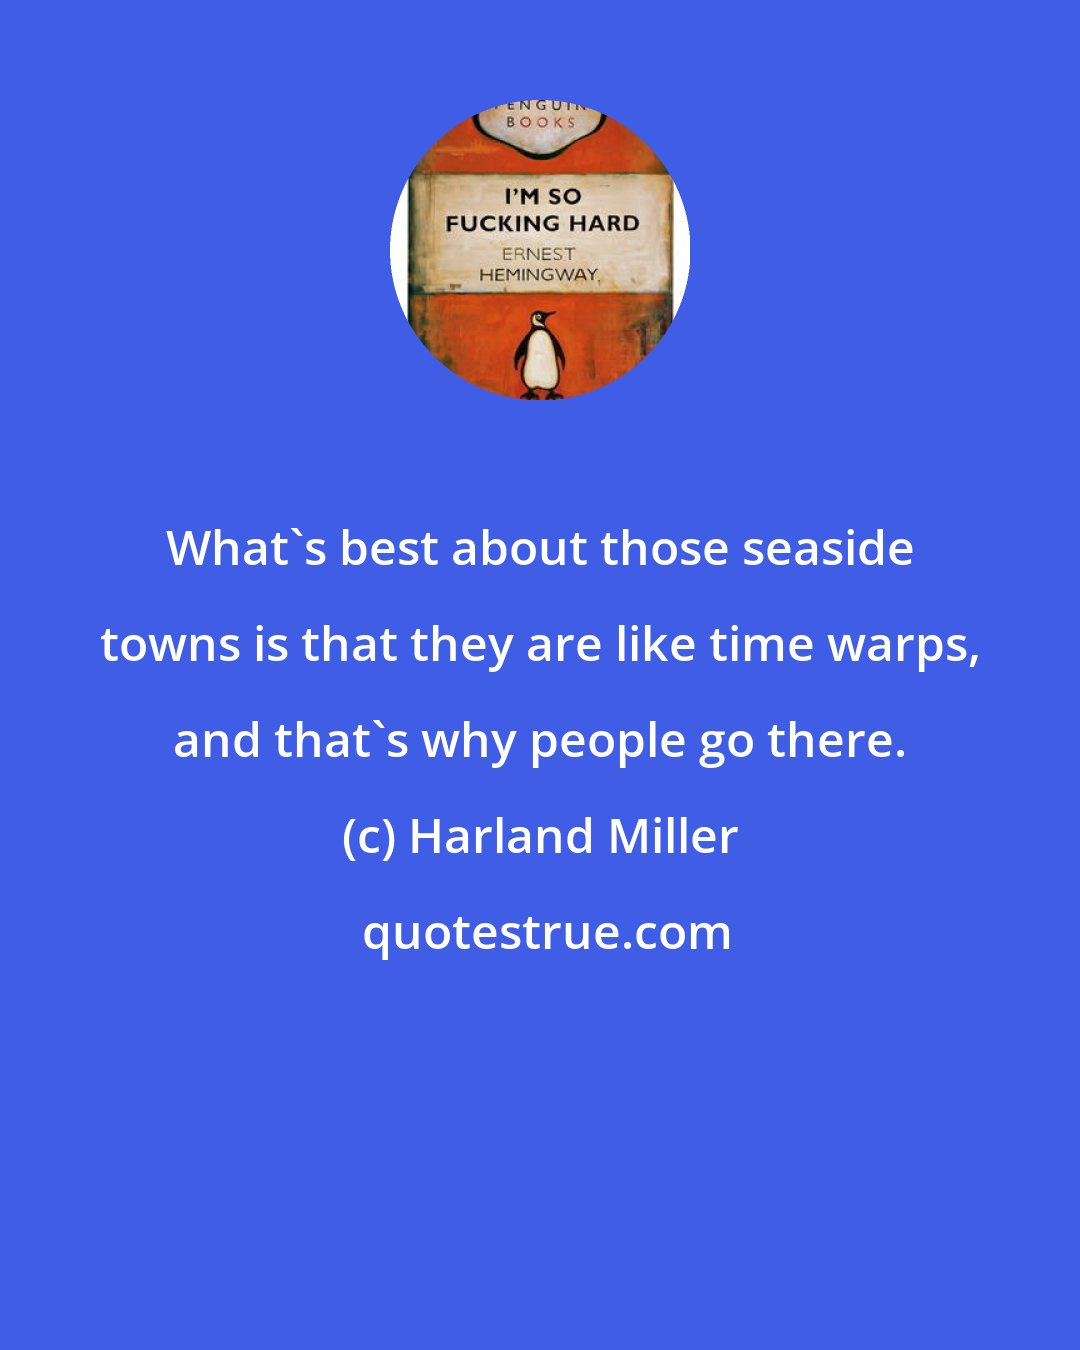 Harland Miller: What's best about those seaside towns is that they are like time warps, and that's why people go there.